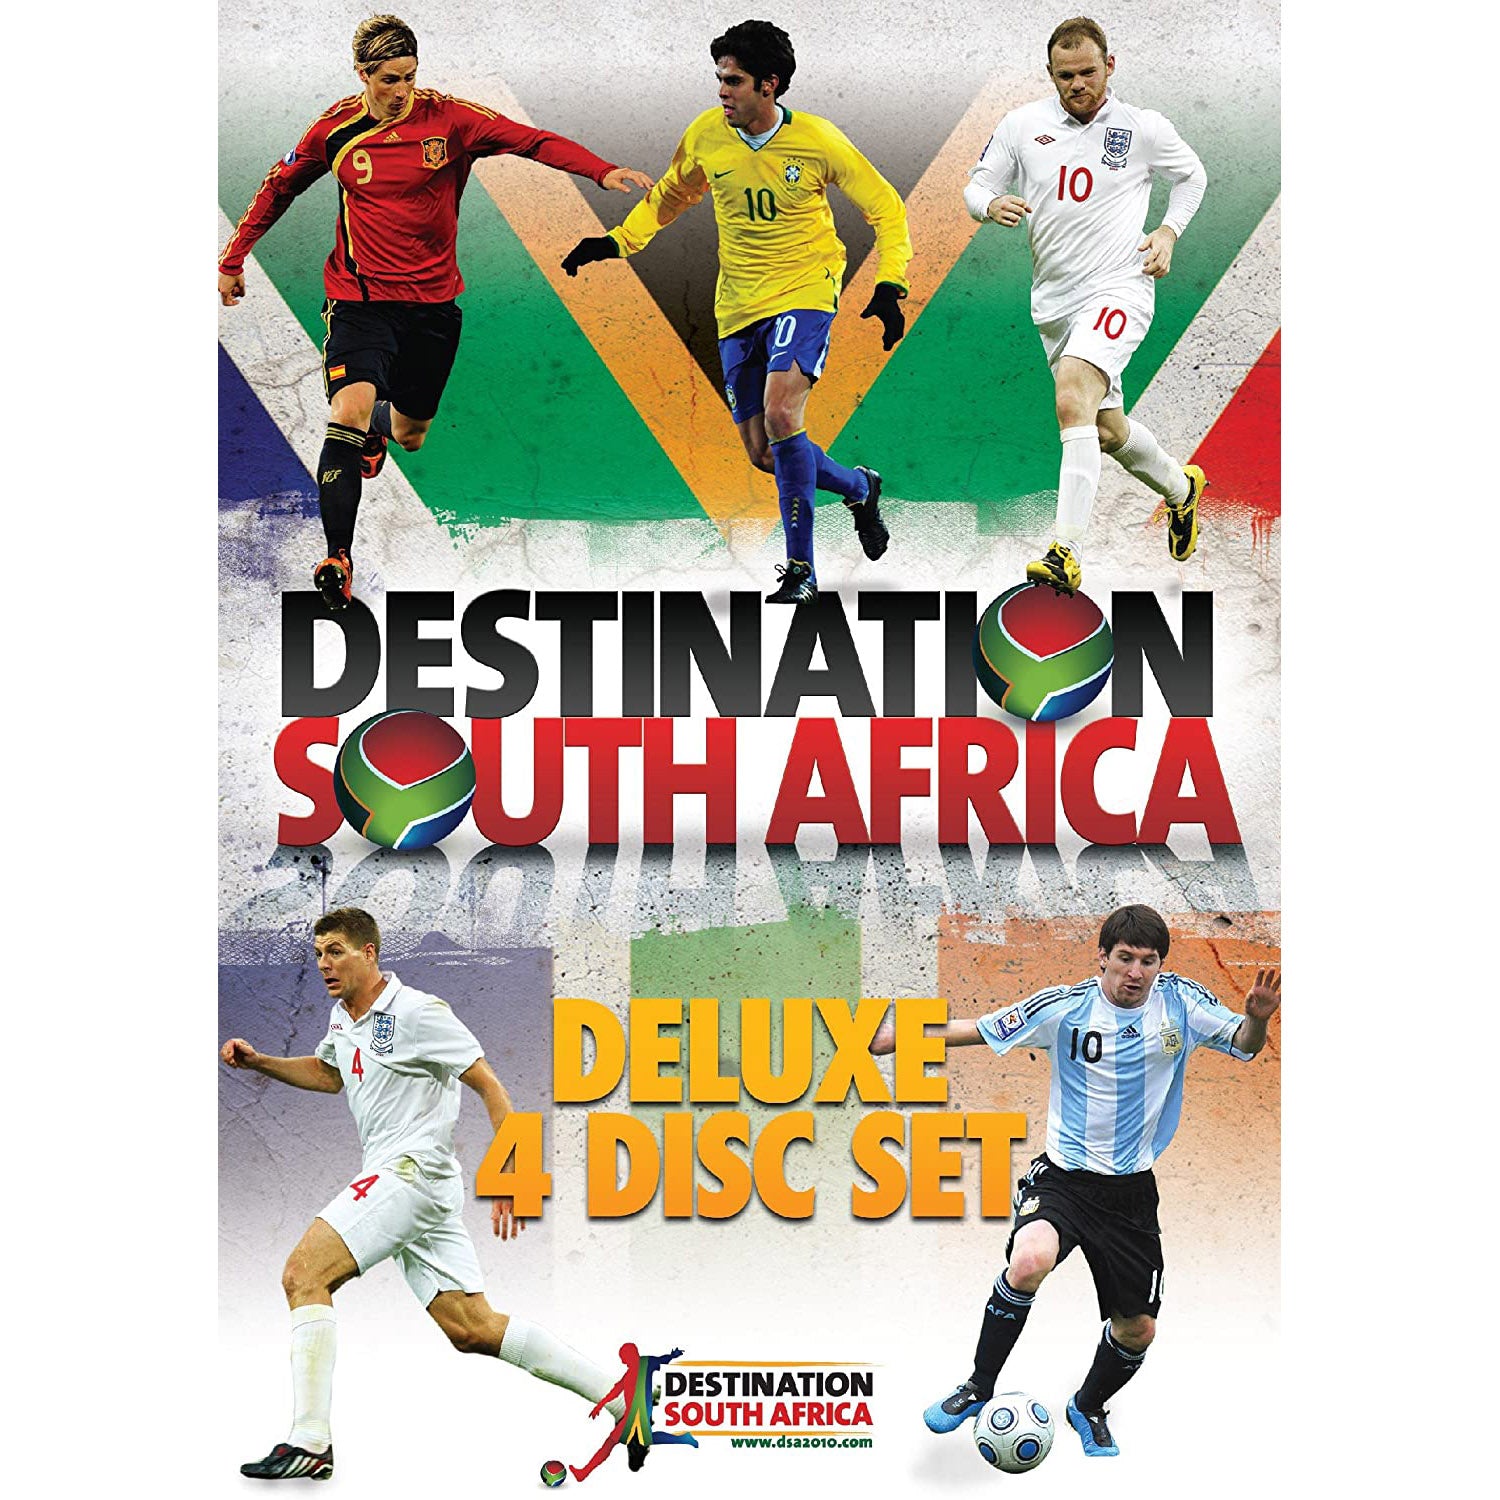 Destination South Africa – Deluxe 4 Disc Set